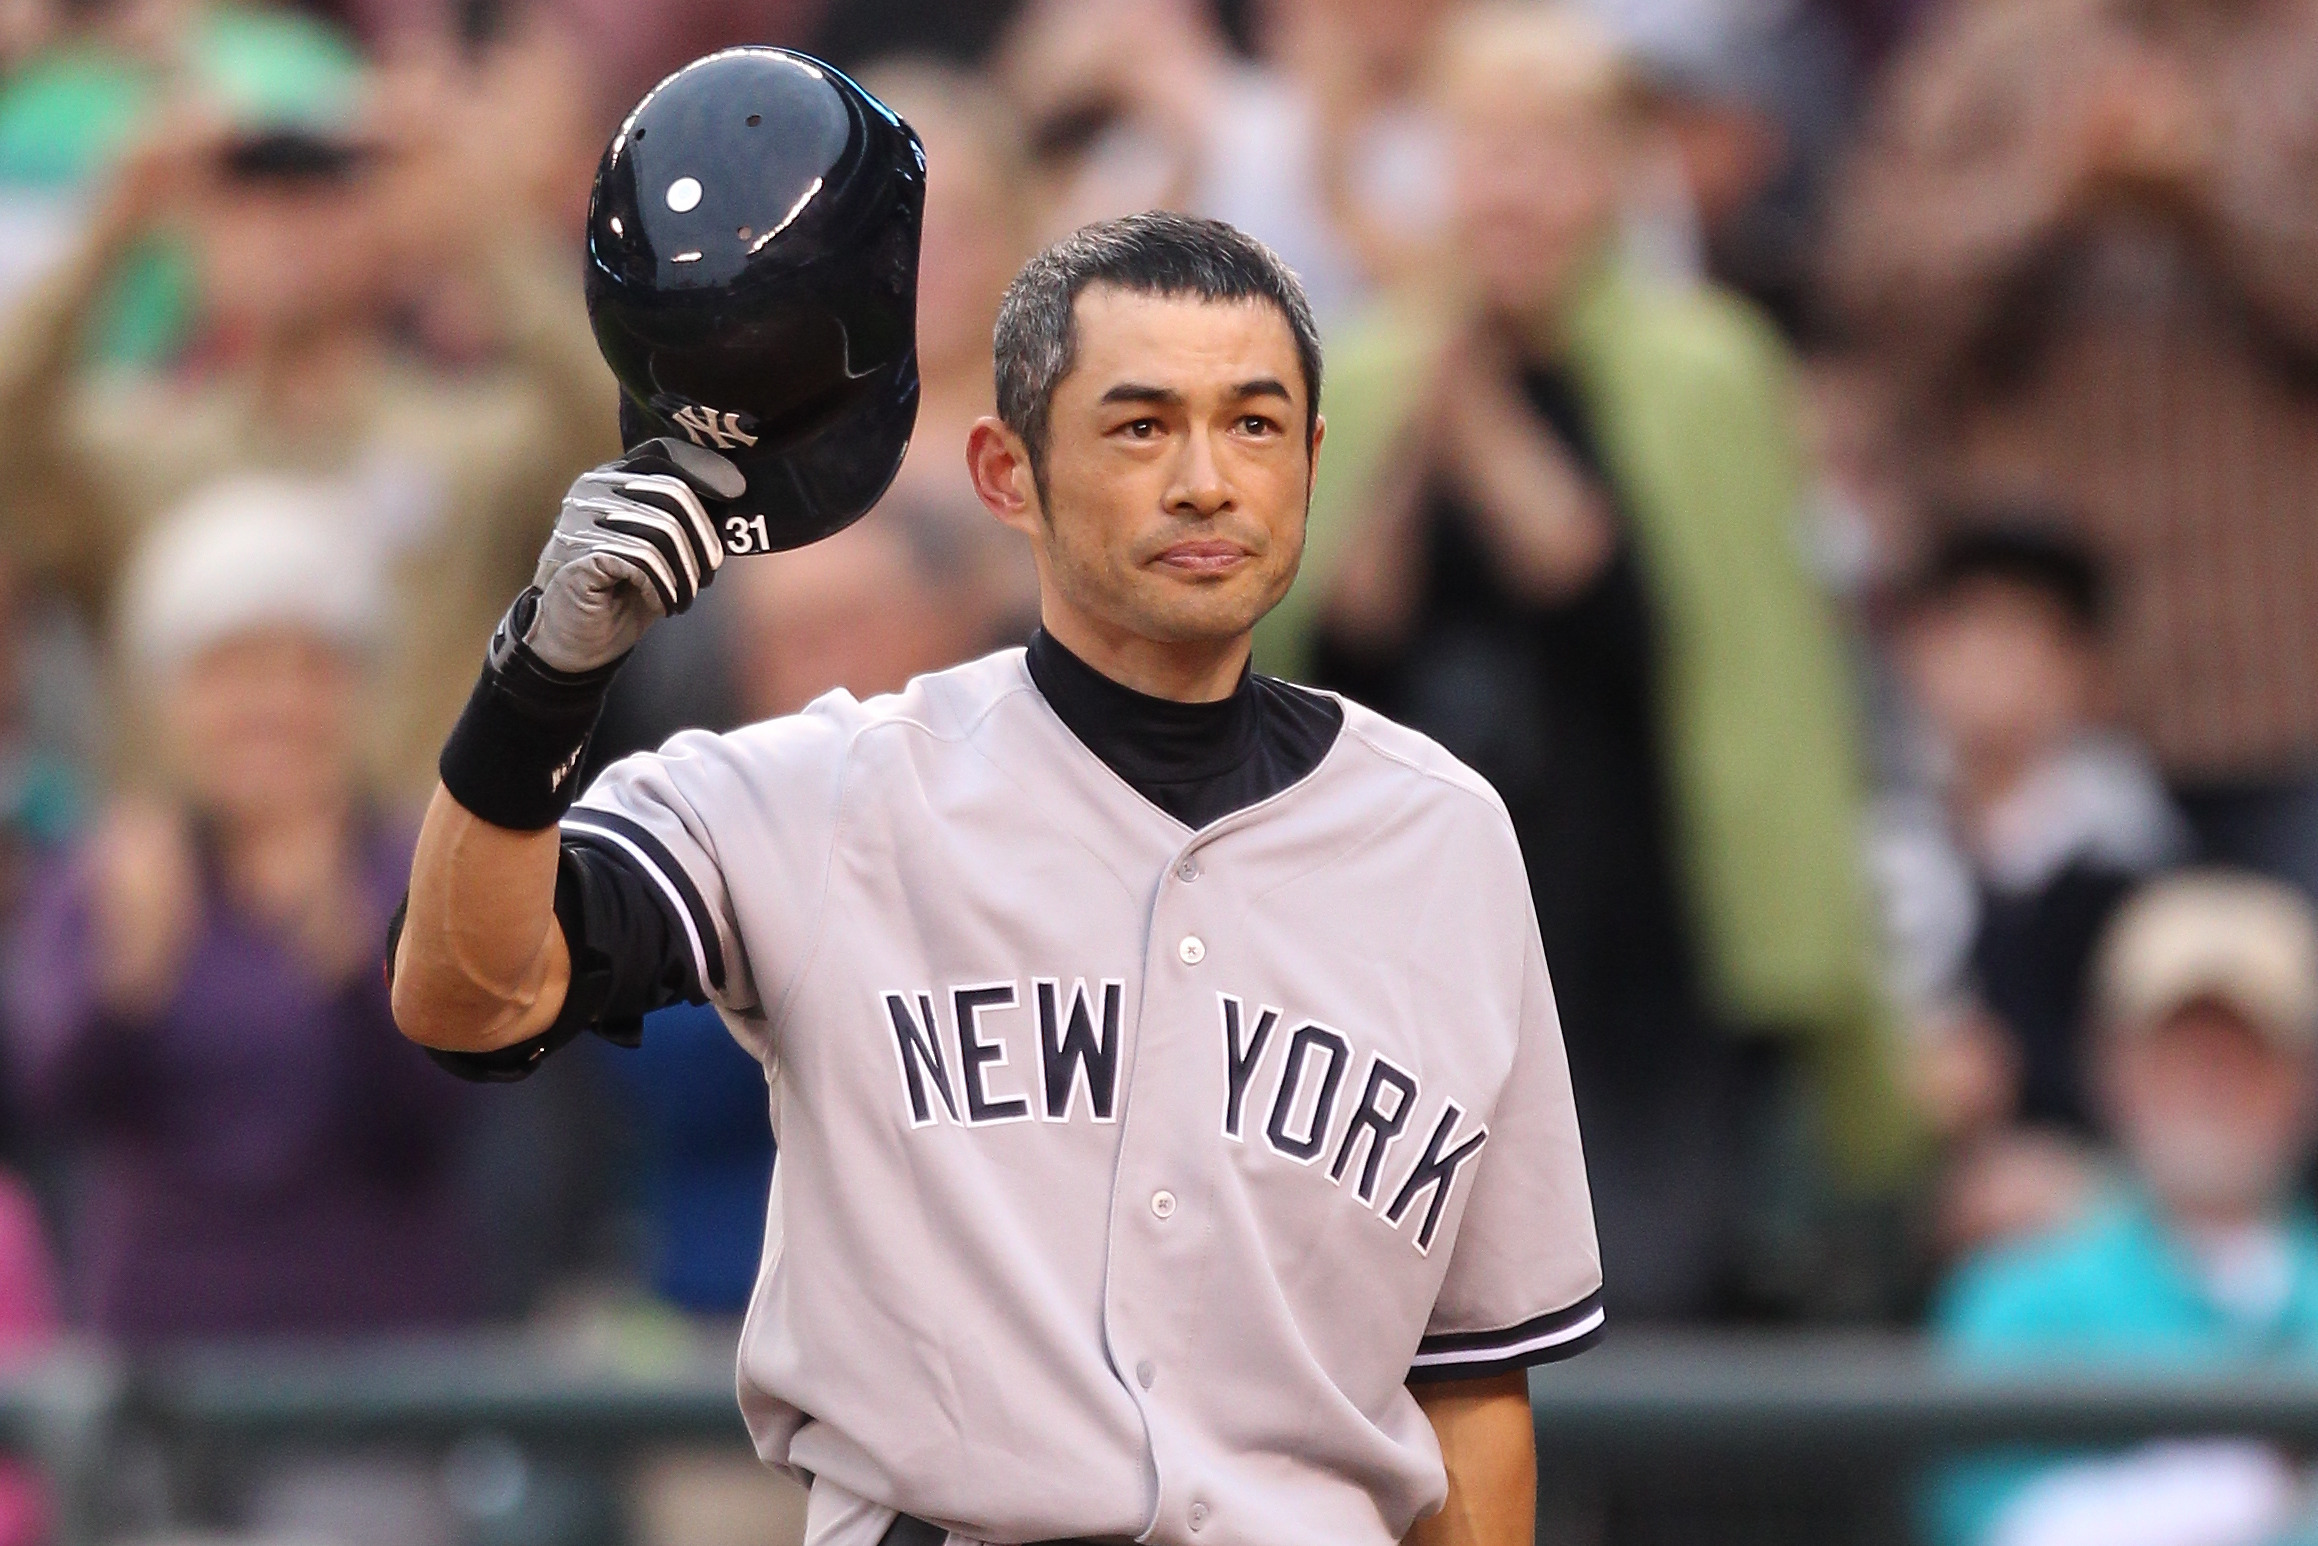 Seattle Mariners' Ichiro Suzuki takes a lead off second base against the  New York Yankees in Major League Baseball action Saturday, May 3, 2008 at  Yankee Stadium in New York. (AP Photo/Julie